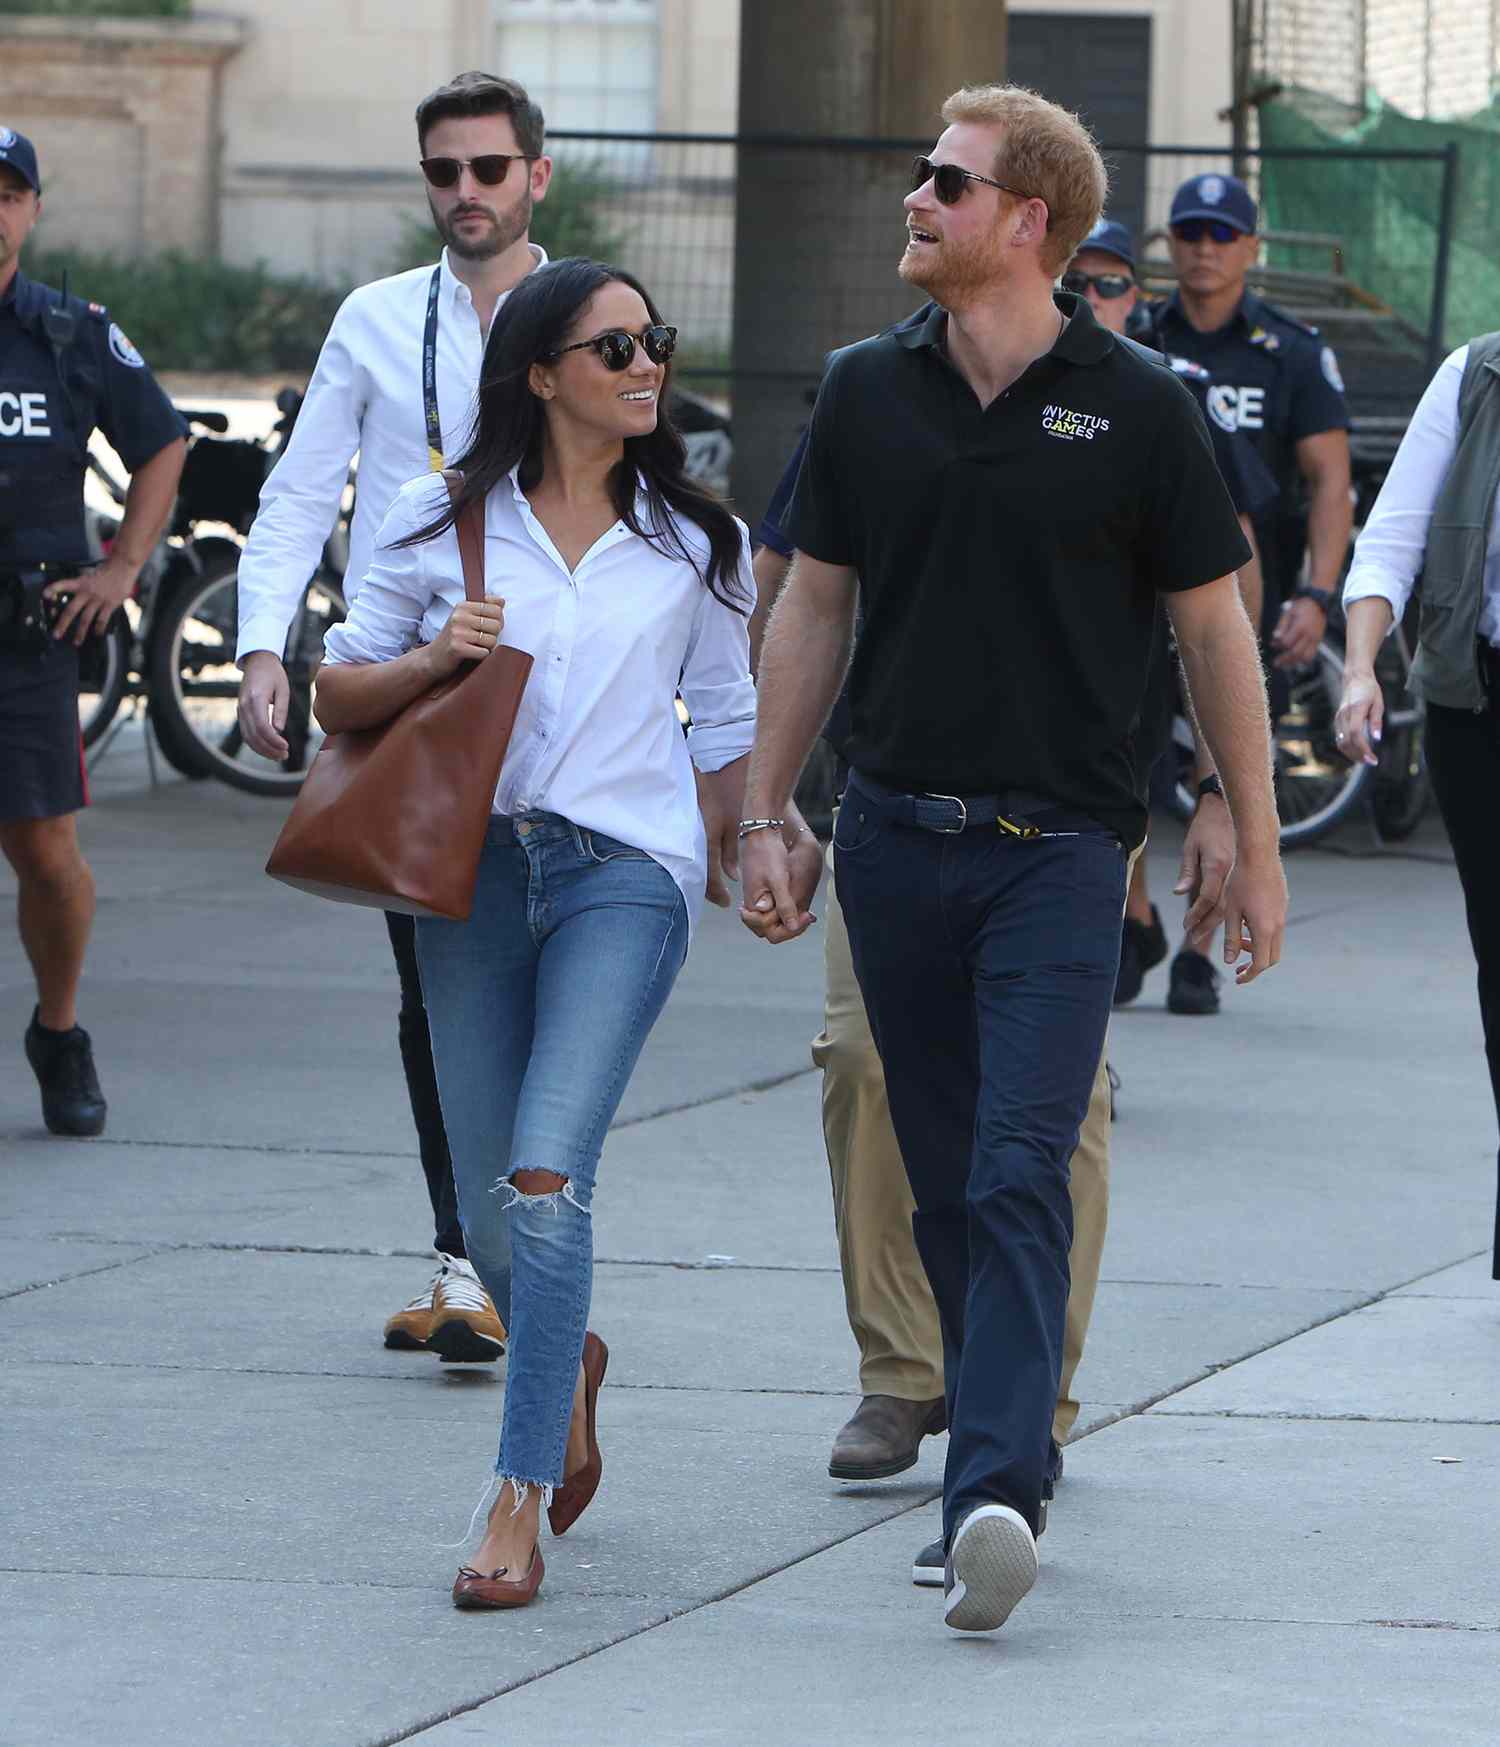 Meghan Markle Invictus Games Outfits: How to Buy | PEOPLE.com